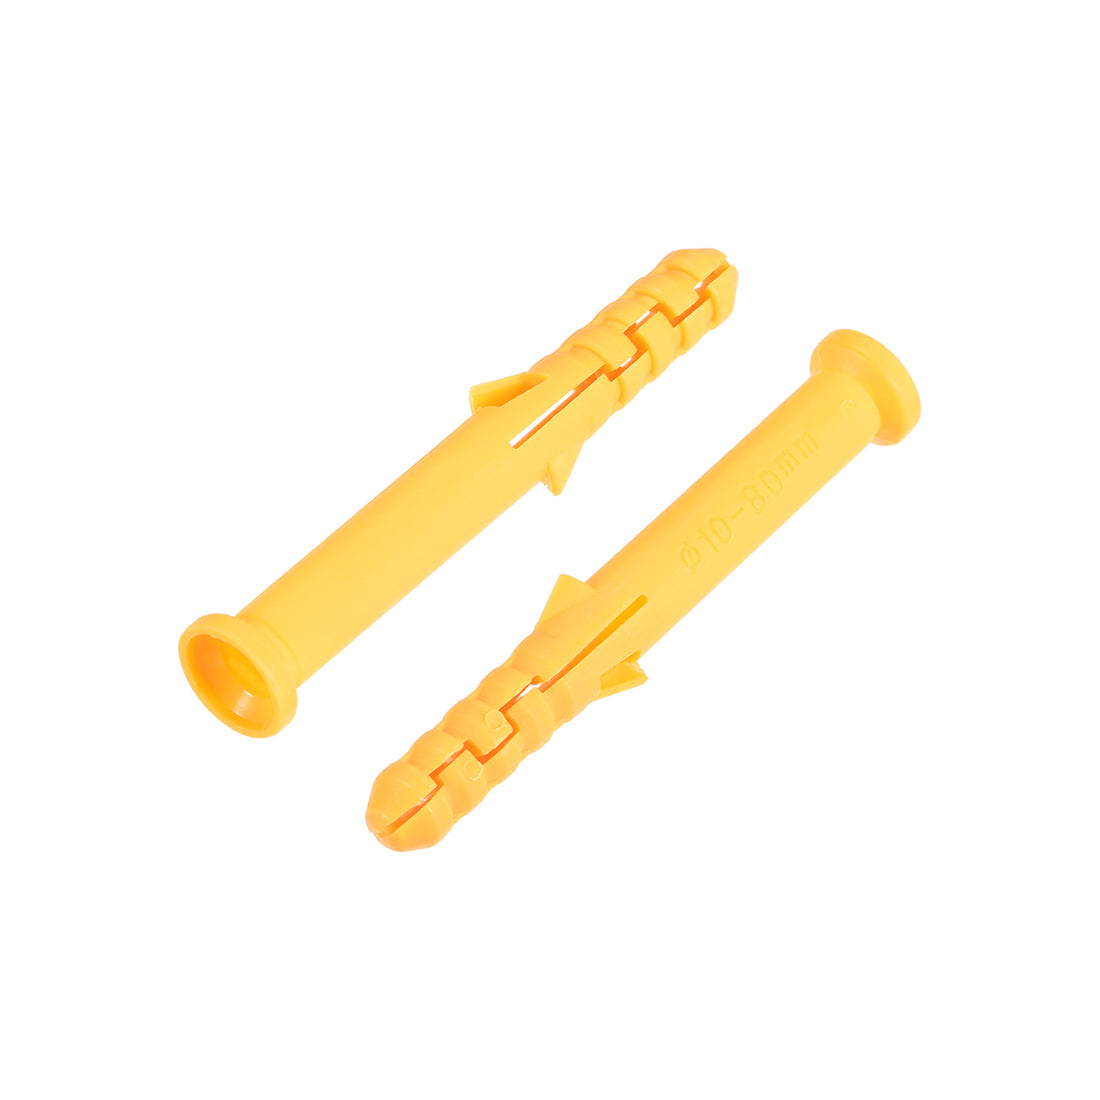 uxcell Uxcell 10x80mm Plastic Expansion Tube Bolts Column Frame Fixings Yellow 30pcs